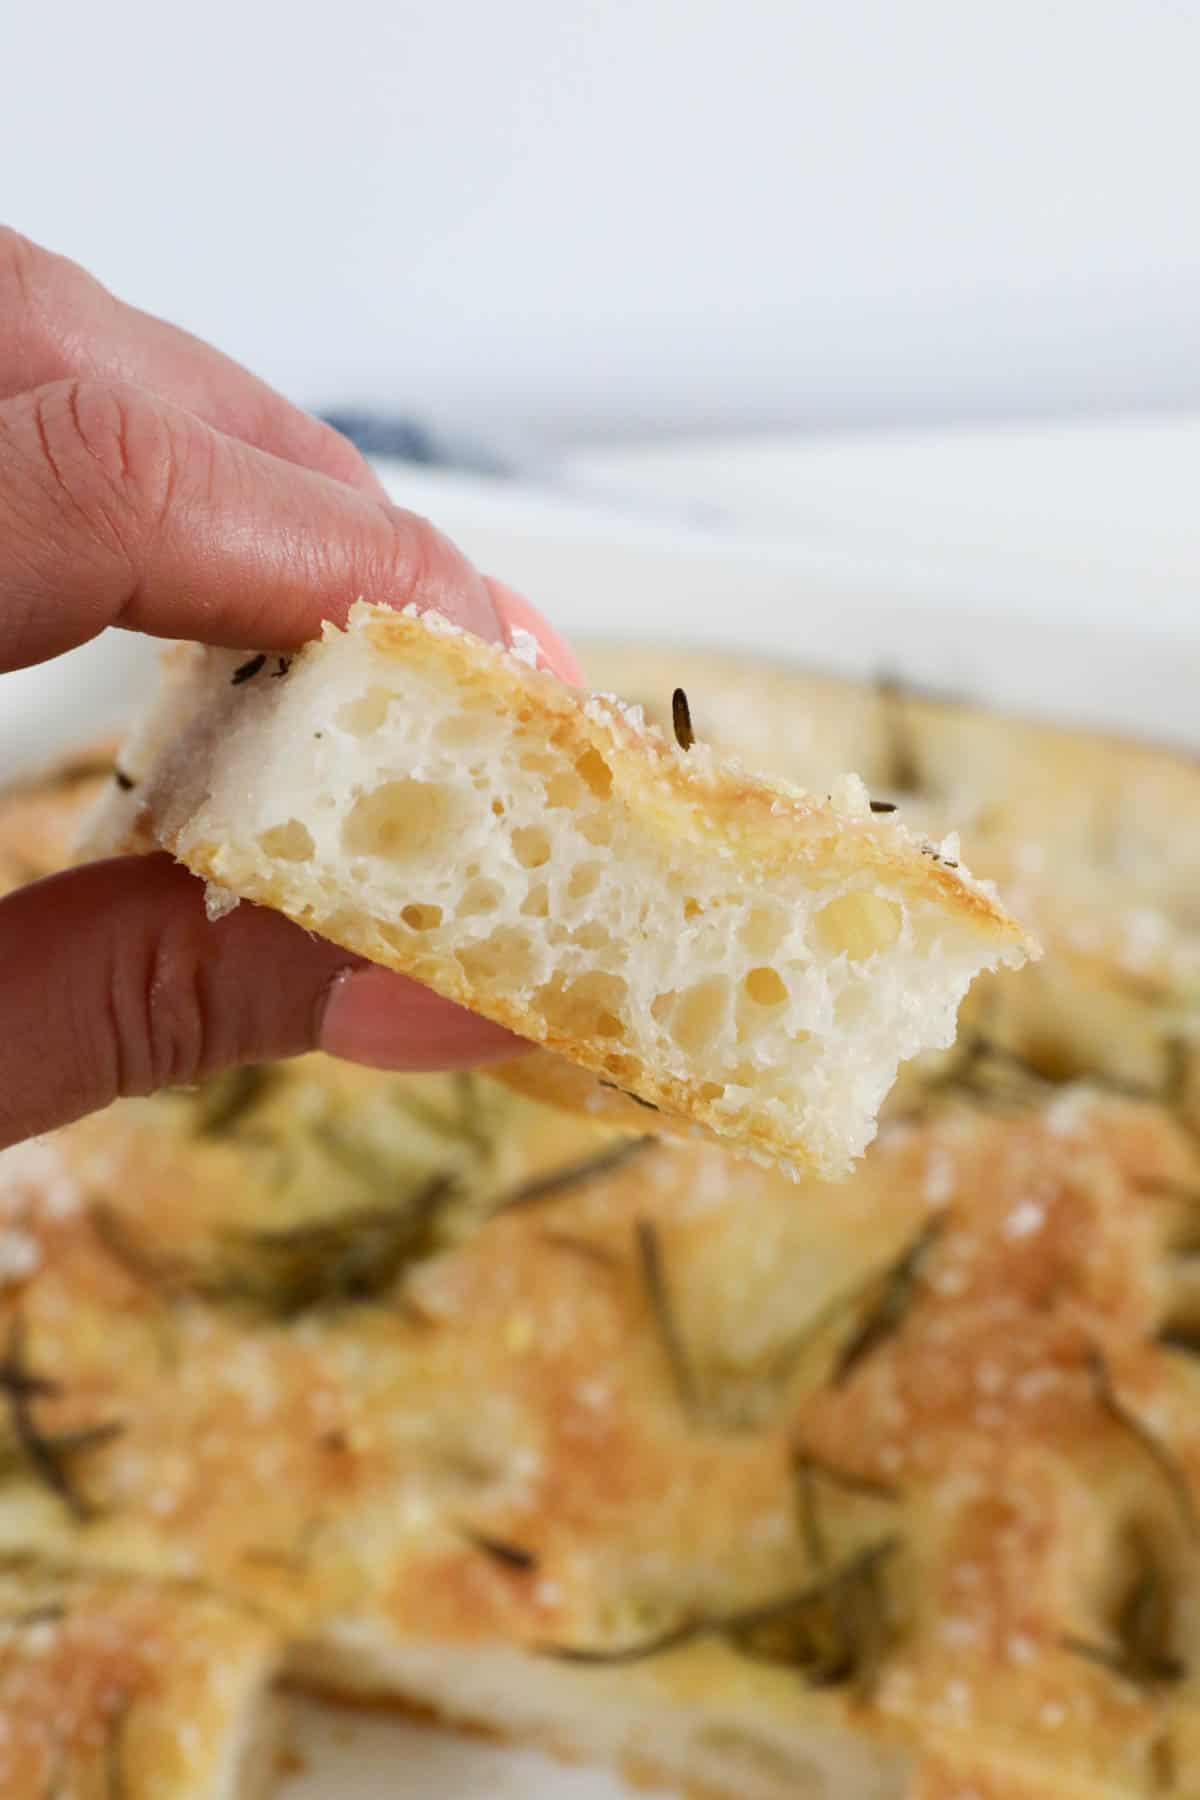 A hand holding a piece of focaccia bread with lots of holes inside.